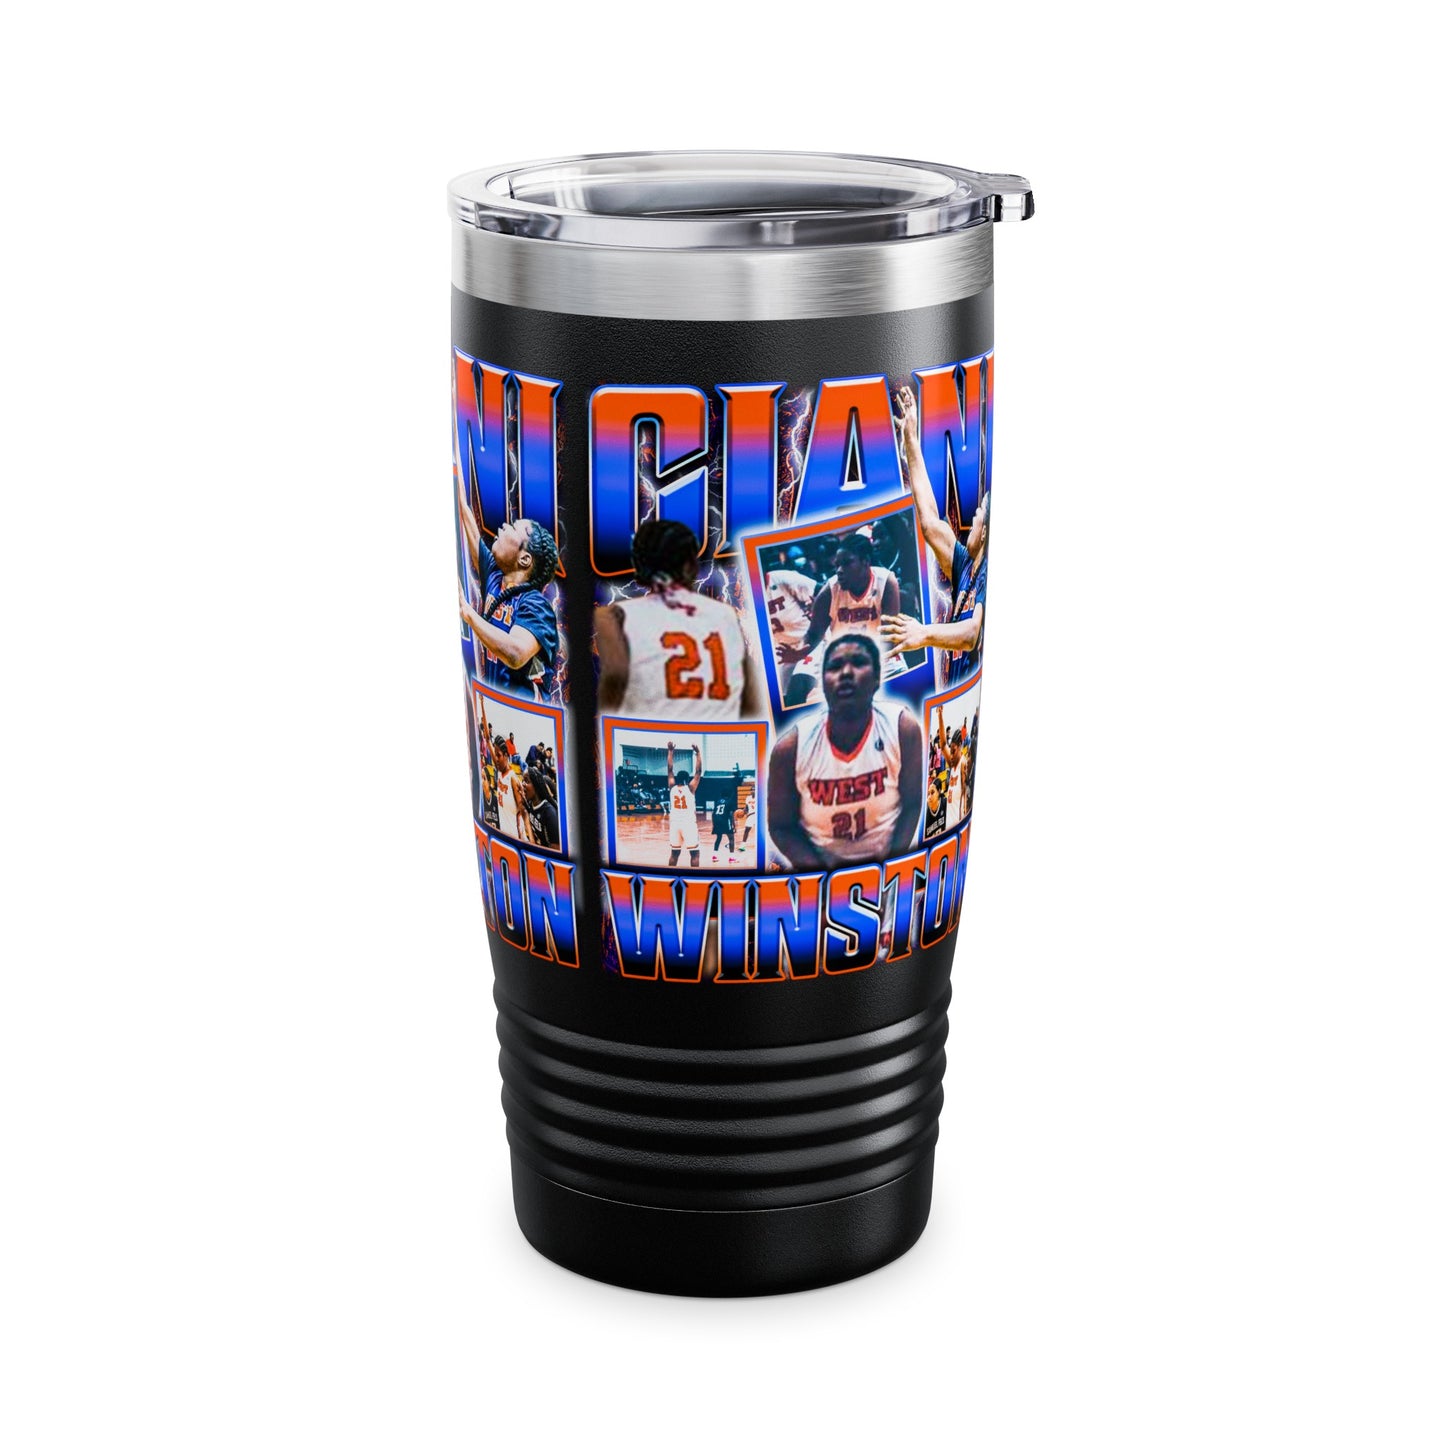 Ciani Winston Stainless Steal Tumbler